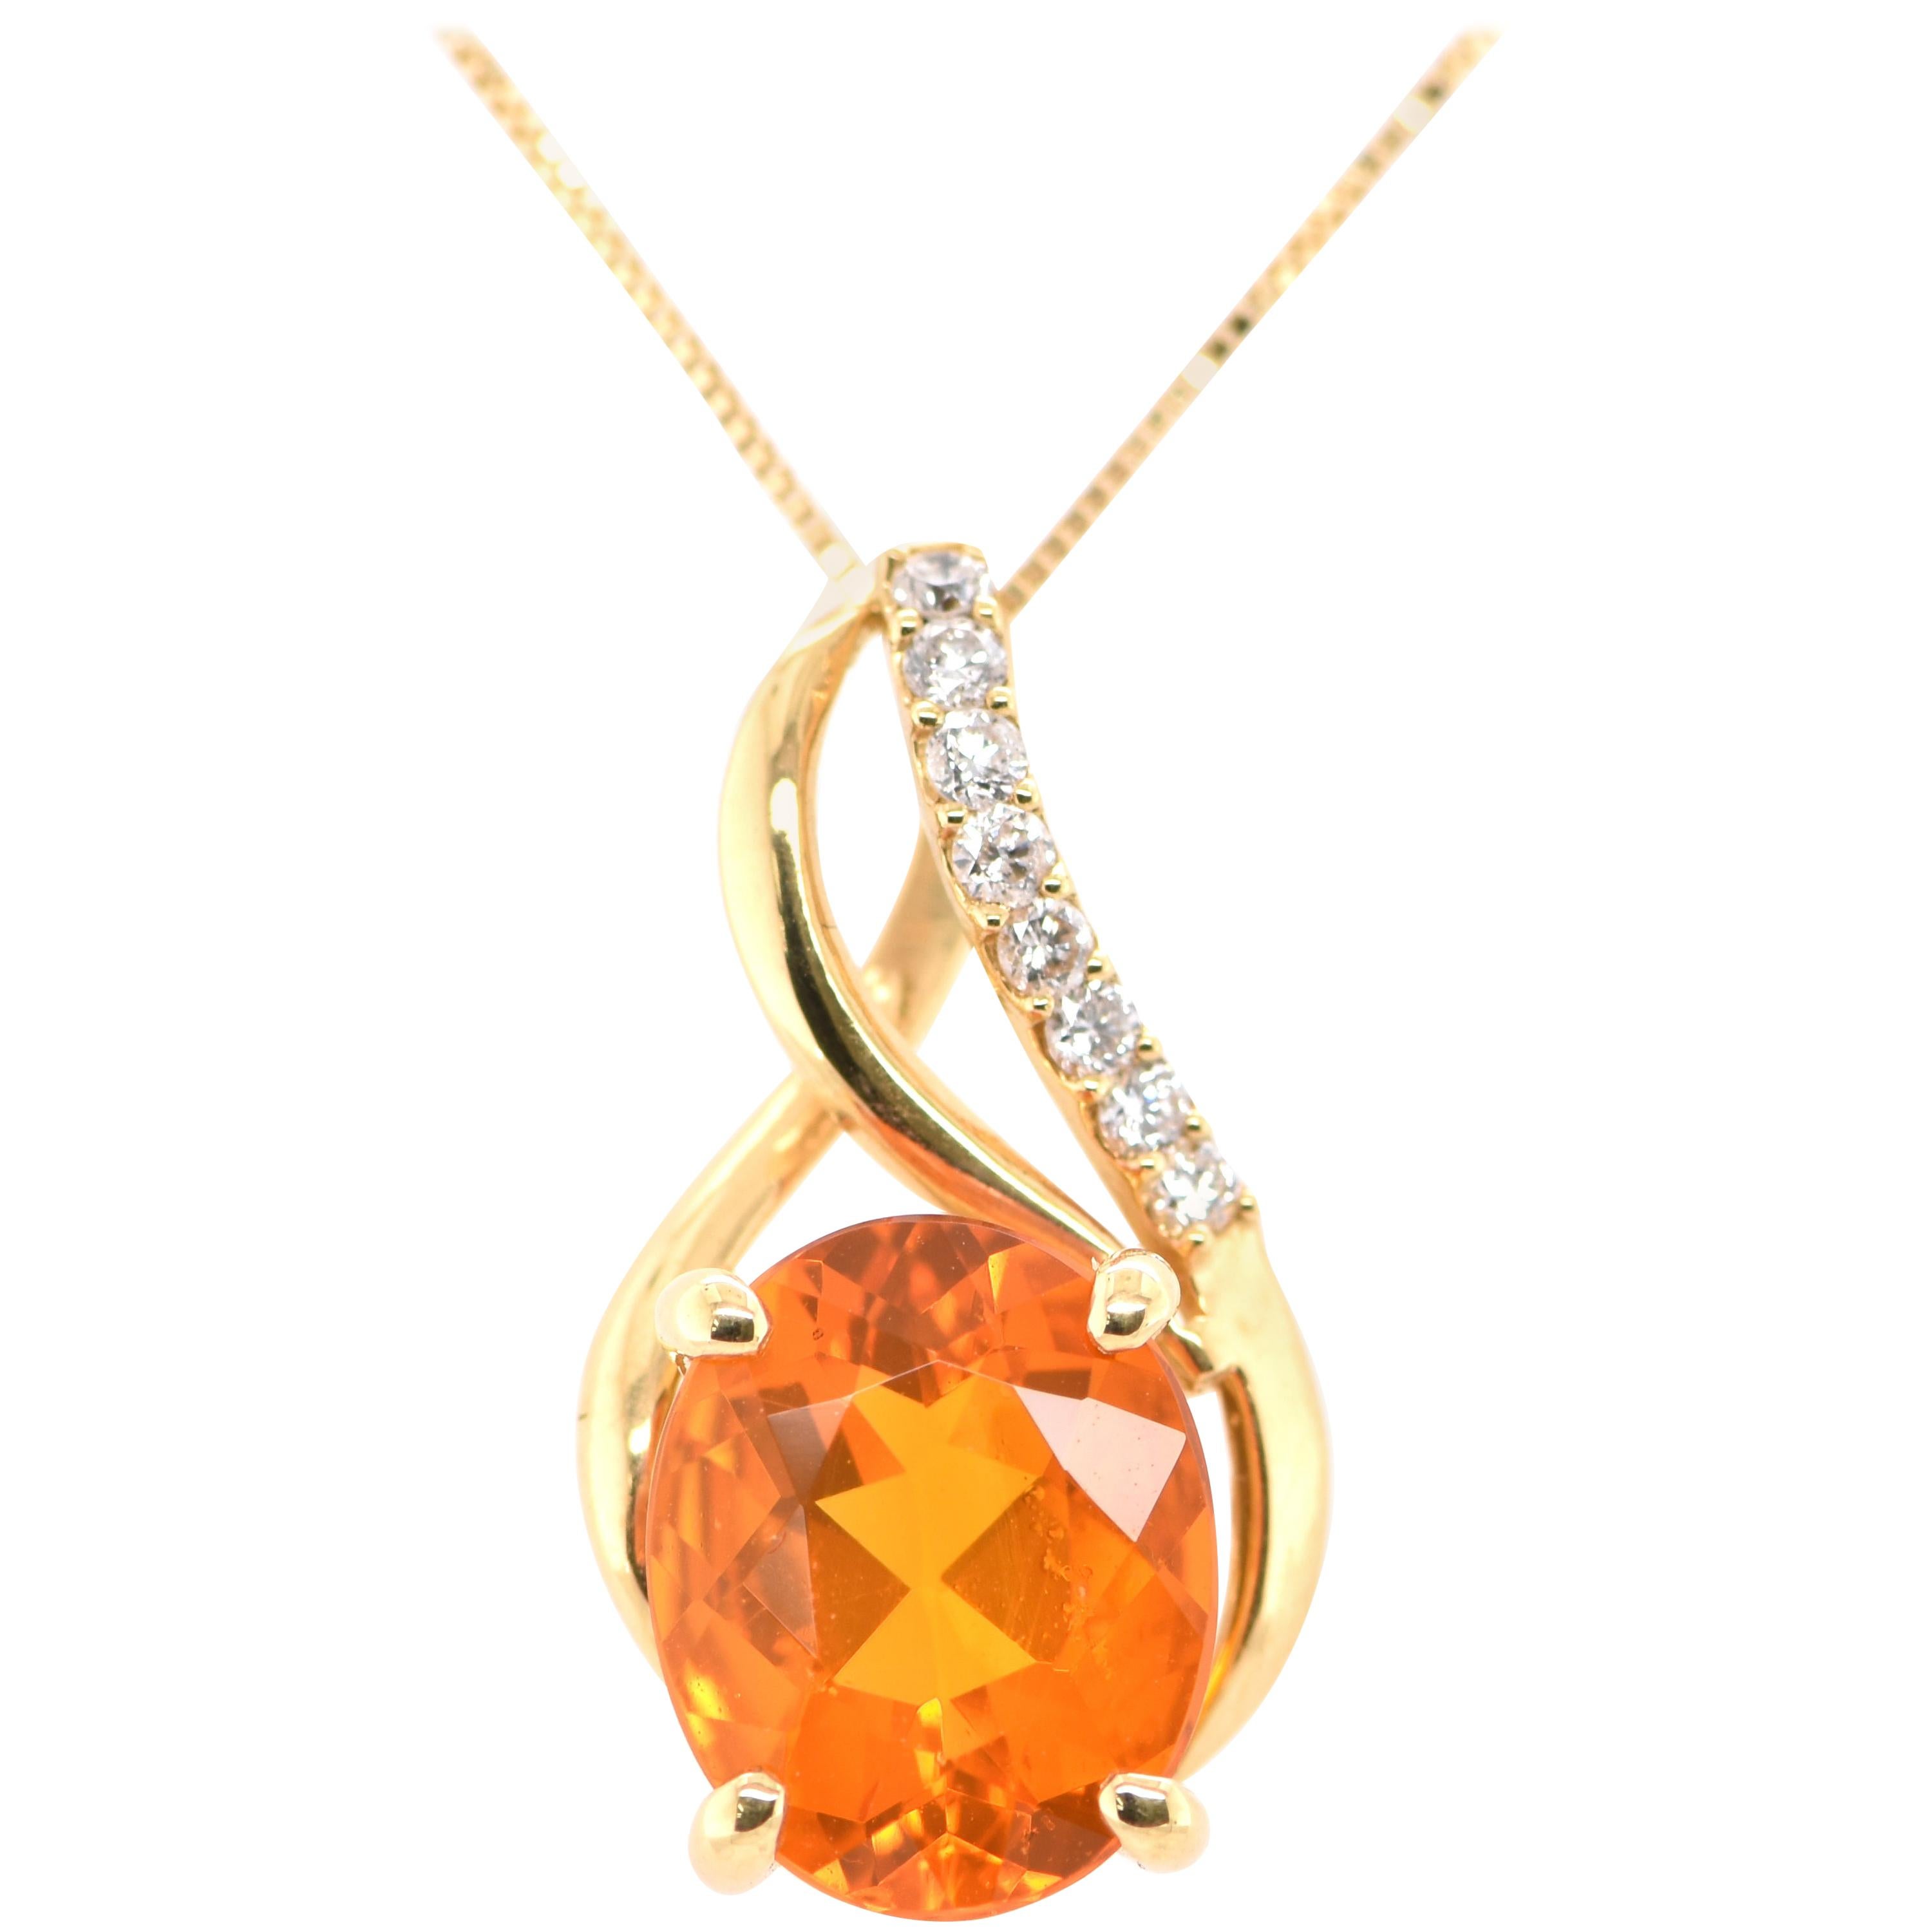 2.35 Carat Natural Faceted Fire Opal and Diamond Pendant Set in 18K Yellow Gold For Sale